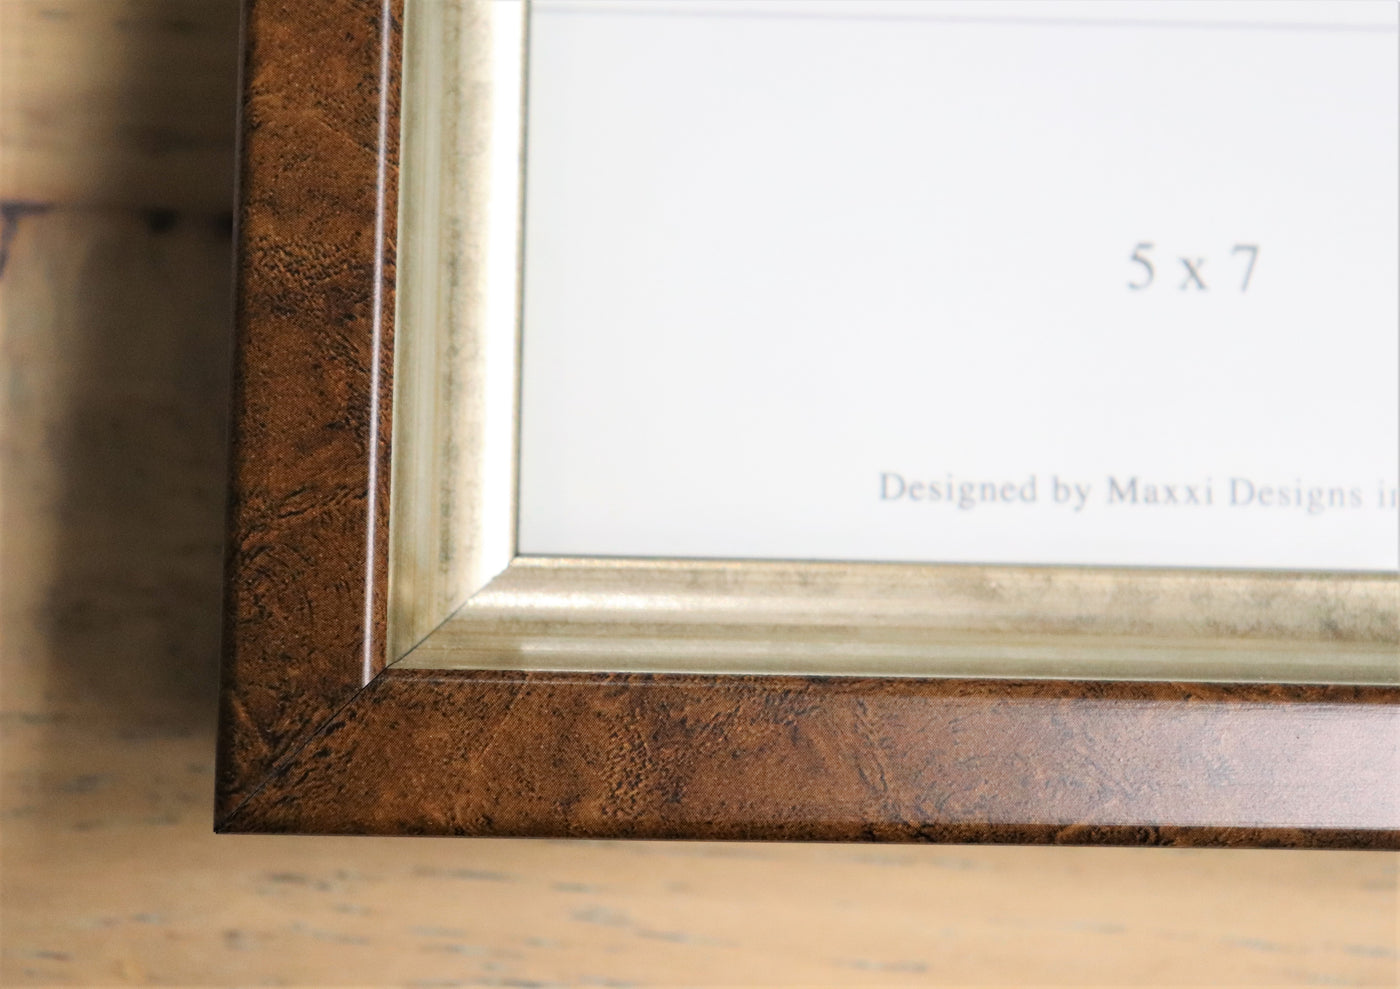 5" x 7" Wood/Silver Photo Frame by Maxxi